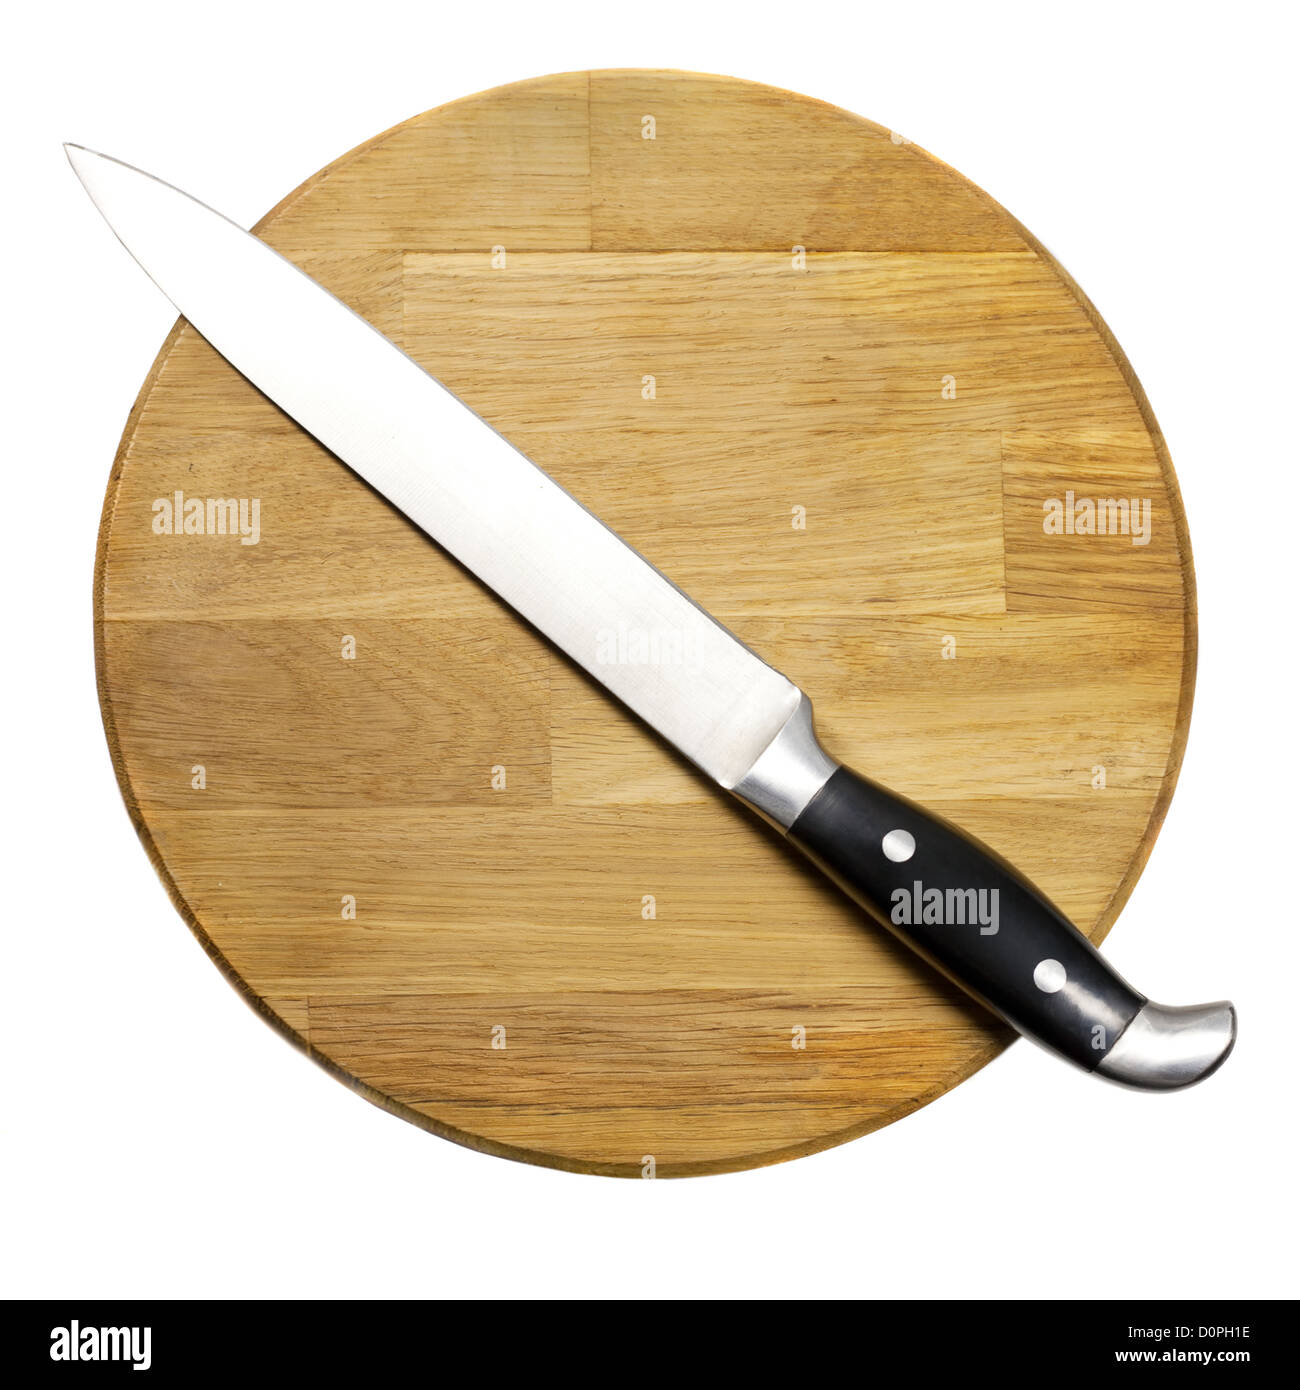 Large kitchen knife on a wooden board Stock Photo